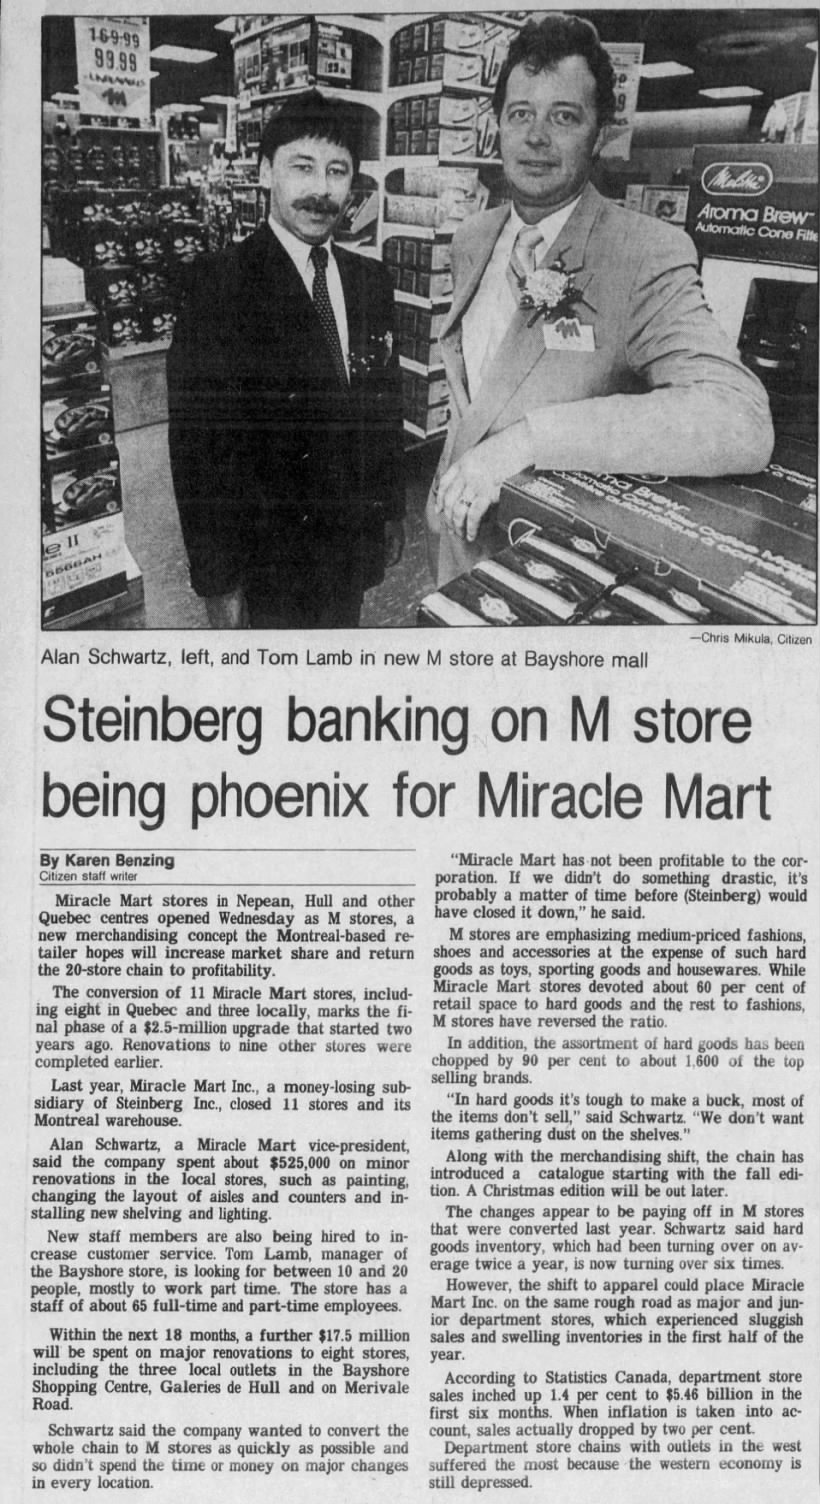 Steinberg banking on M store being phoenix for Miracle Mart